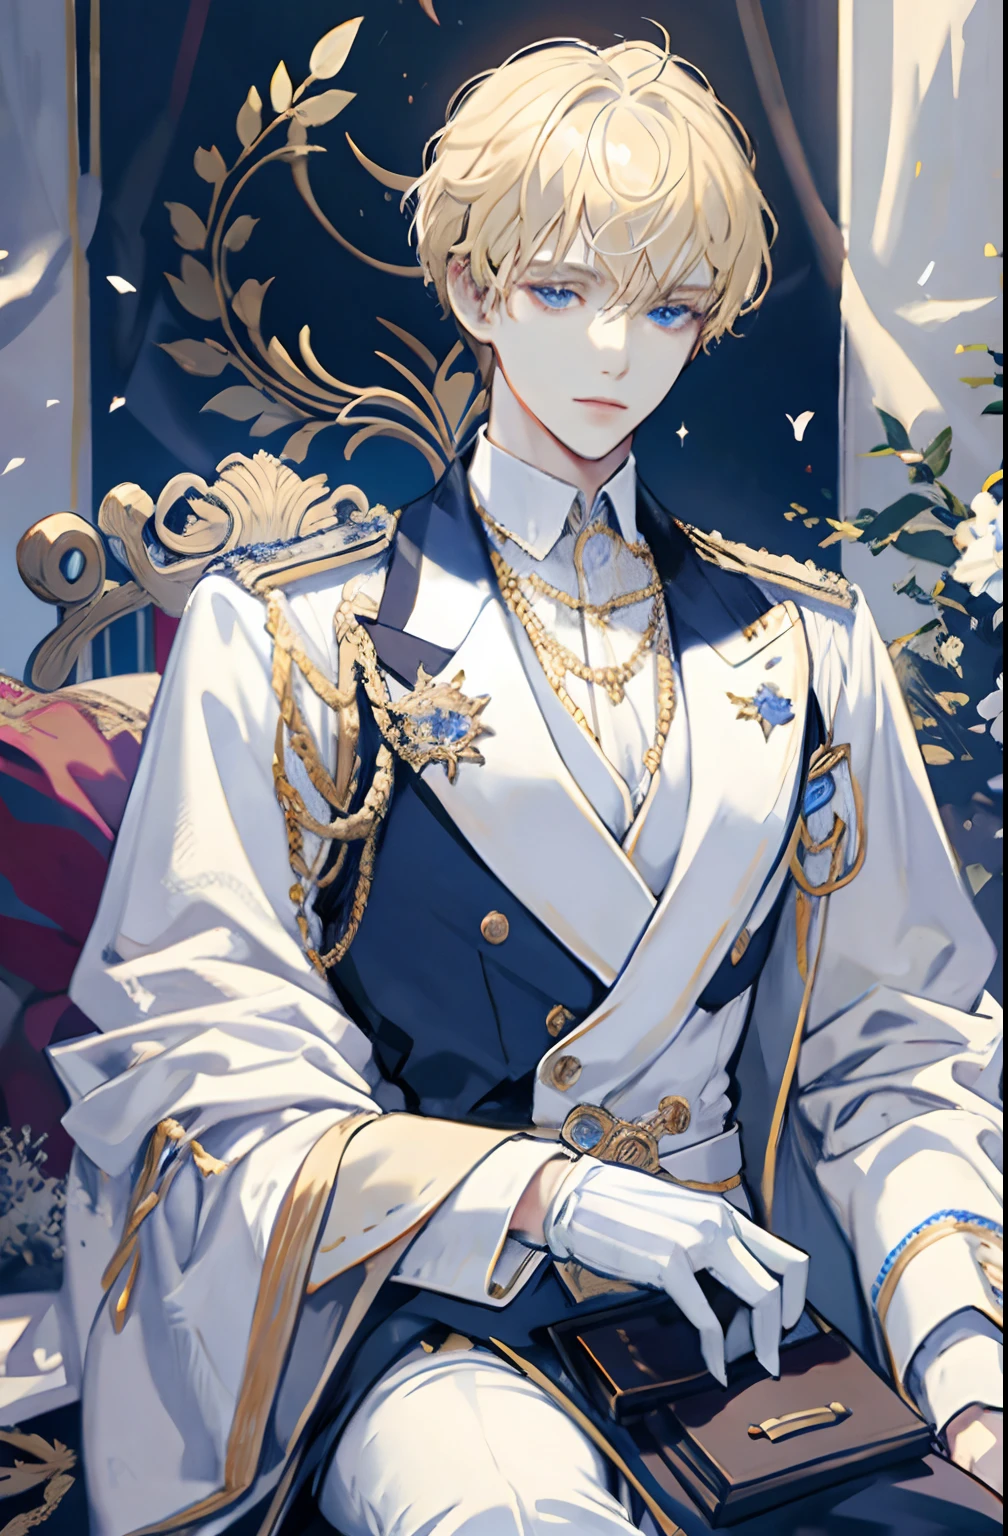 blonde hair, short hair, curly hair, blue eyes, handsome, royalty, nobility, nobleman, high quality, highly detailed, lights, flowers, delicate, white suit, sitting, prince, young man, male, 1boy, portraying delicate eyes, depicting delicate facial features, white uniform, white gloves, aristocratic, medallion, extreme detail, delicate depiction, elegant, royal clothing, depth of field effect, background is palace, dramatic composition, dynamic pose, look at the camera, fine details on clothing, refined features, elegant sitting posture, masterpiece, bad boy